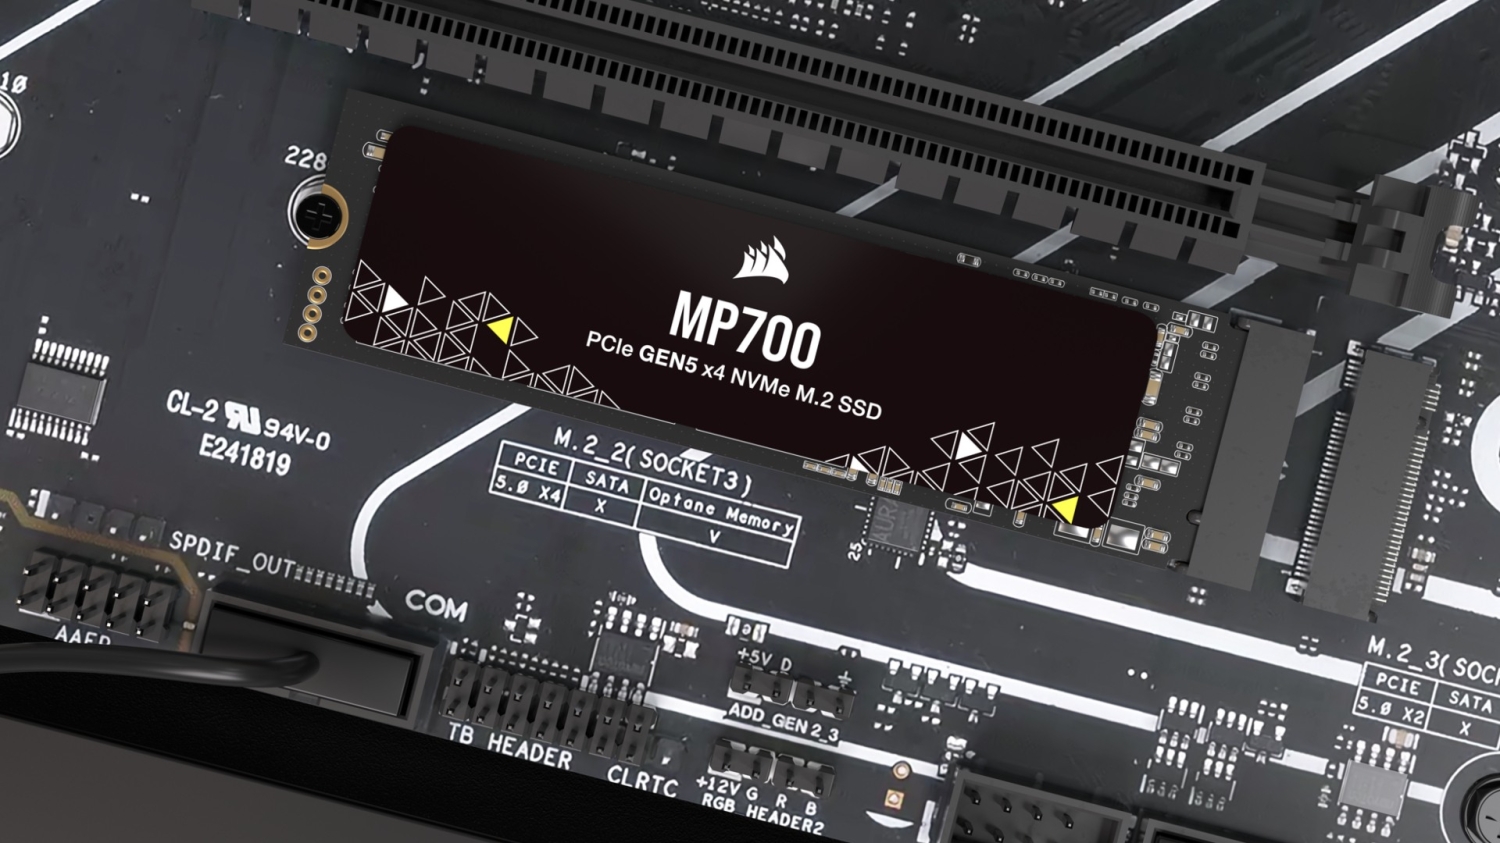 Corsair launches its GB/s PCIe Gen5 M.2 SSD, the MP700